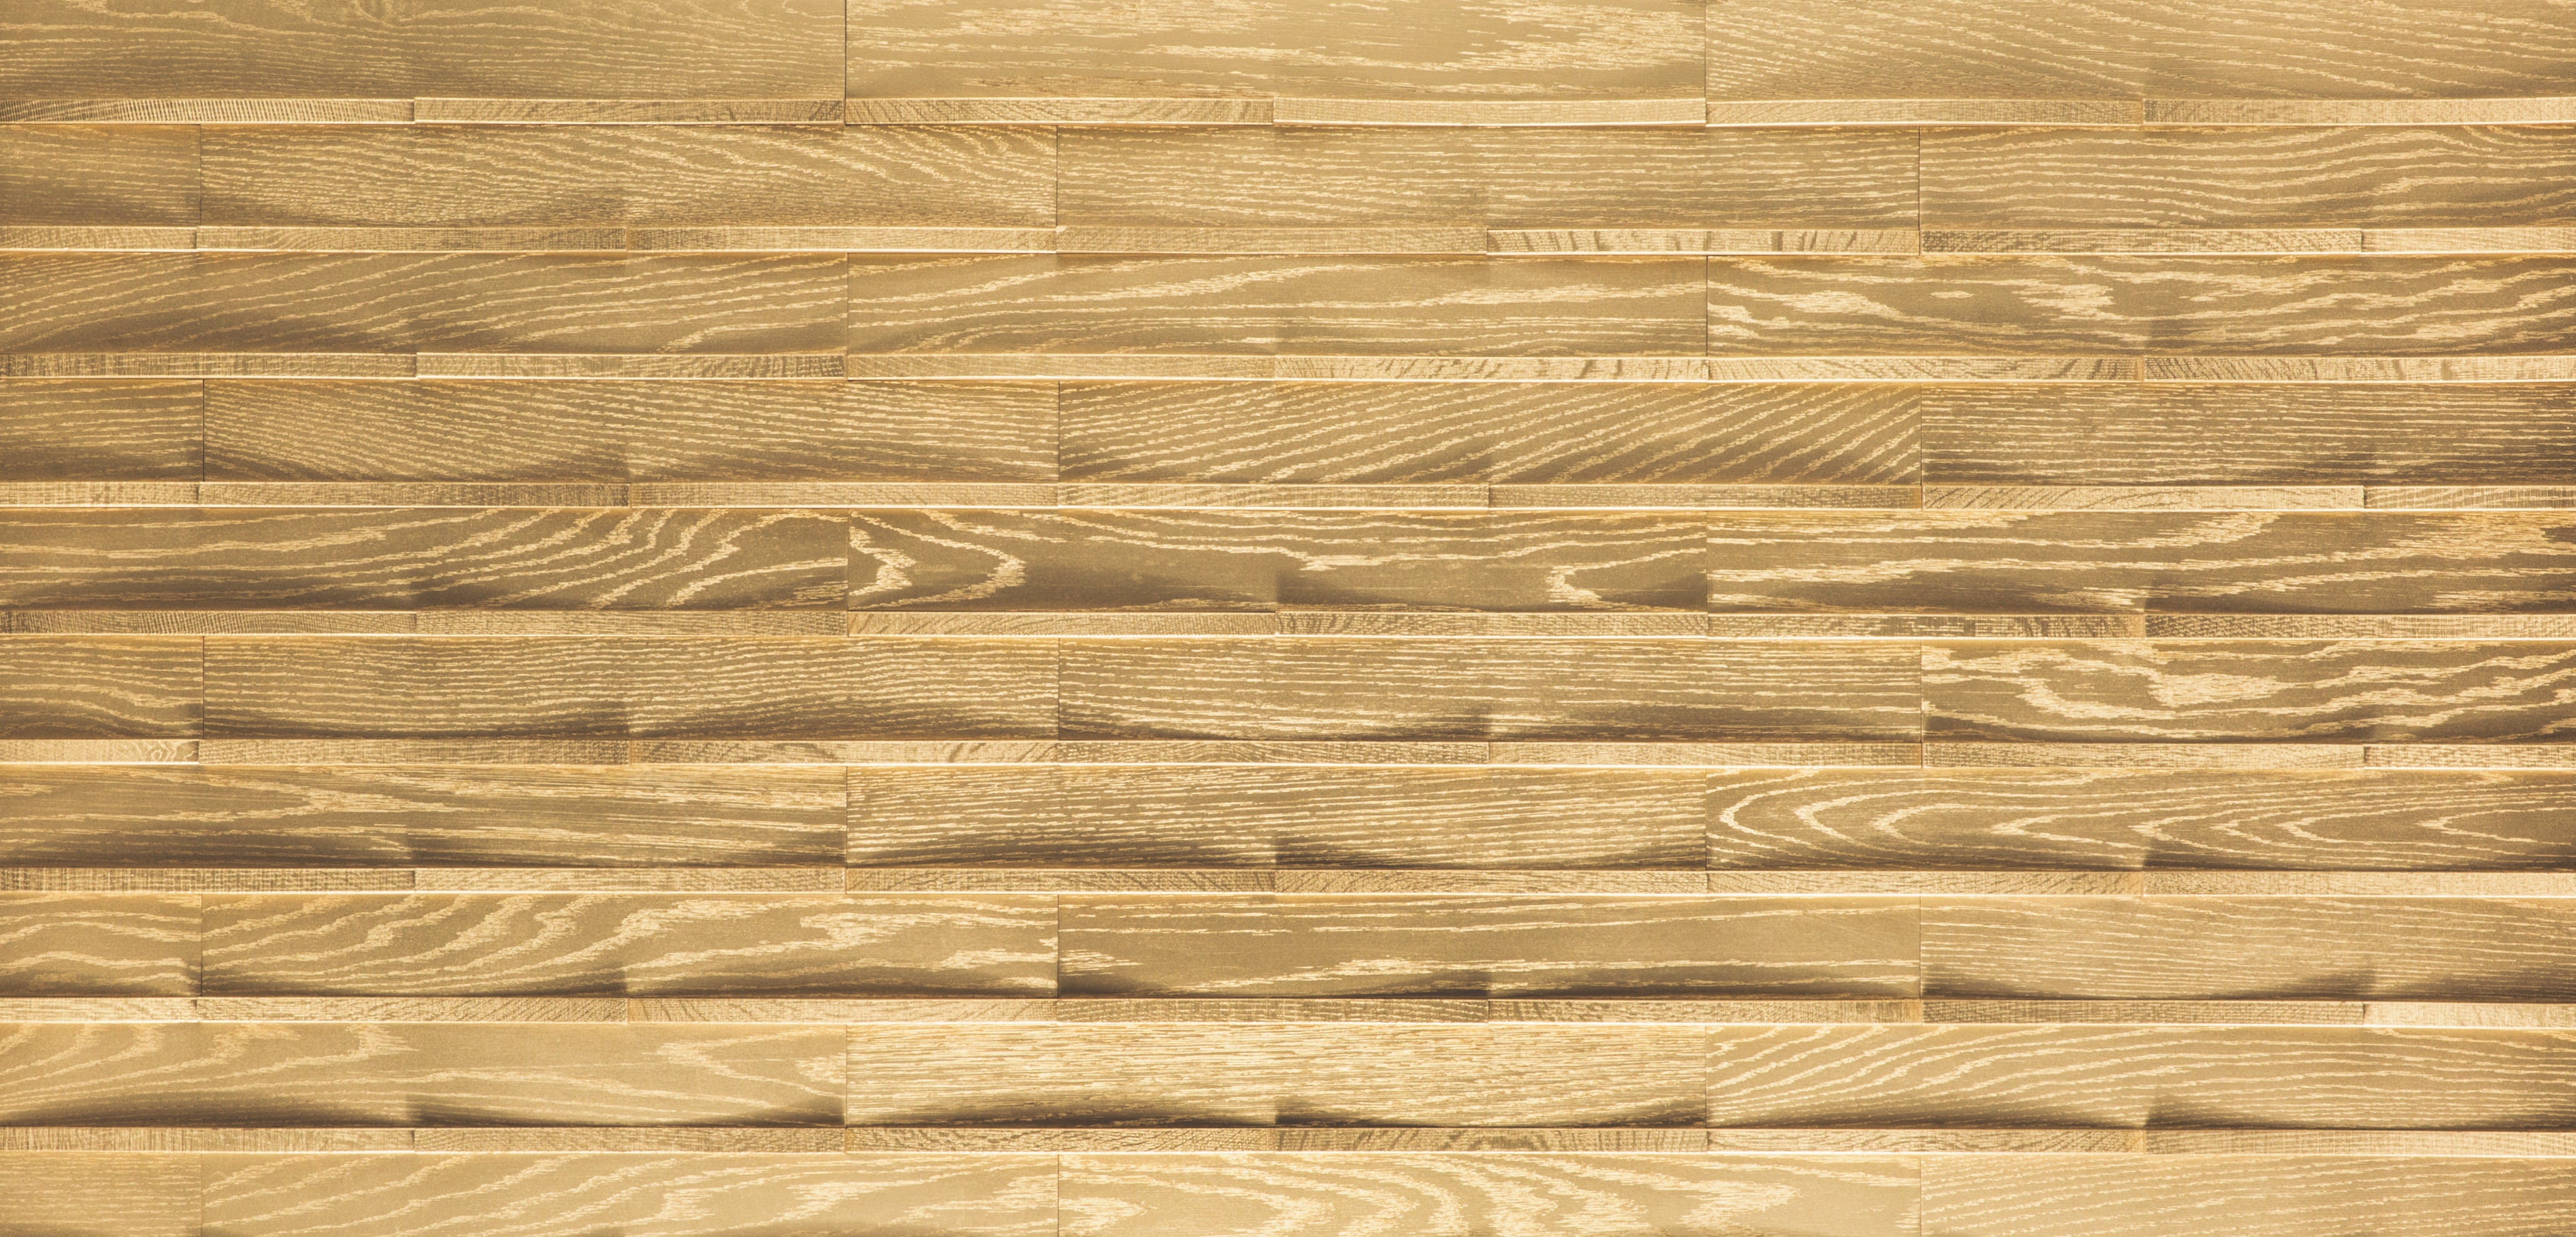 duchateau inceptiv infuse gold oak three dimensional wall natural wood panel lacquer for interior use distributed by surface group international